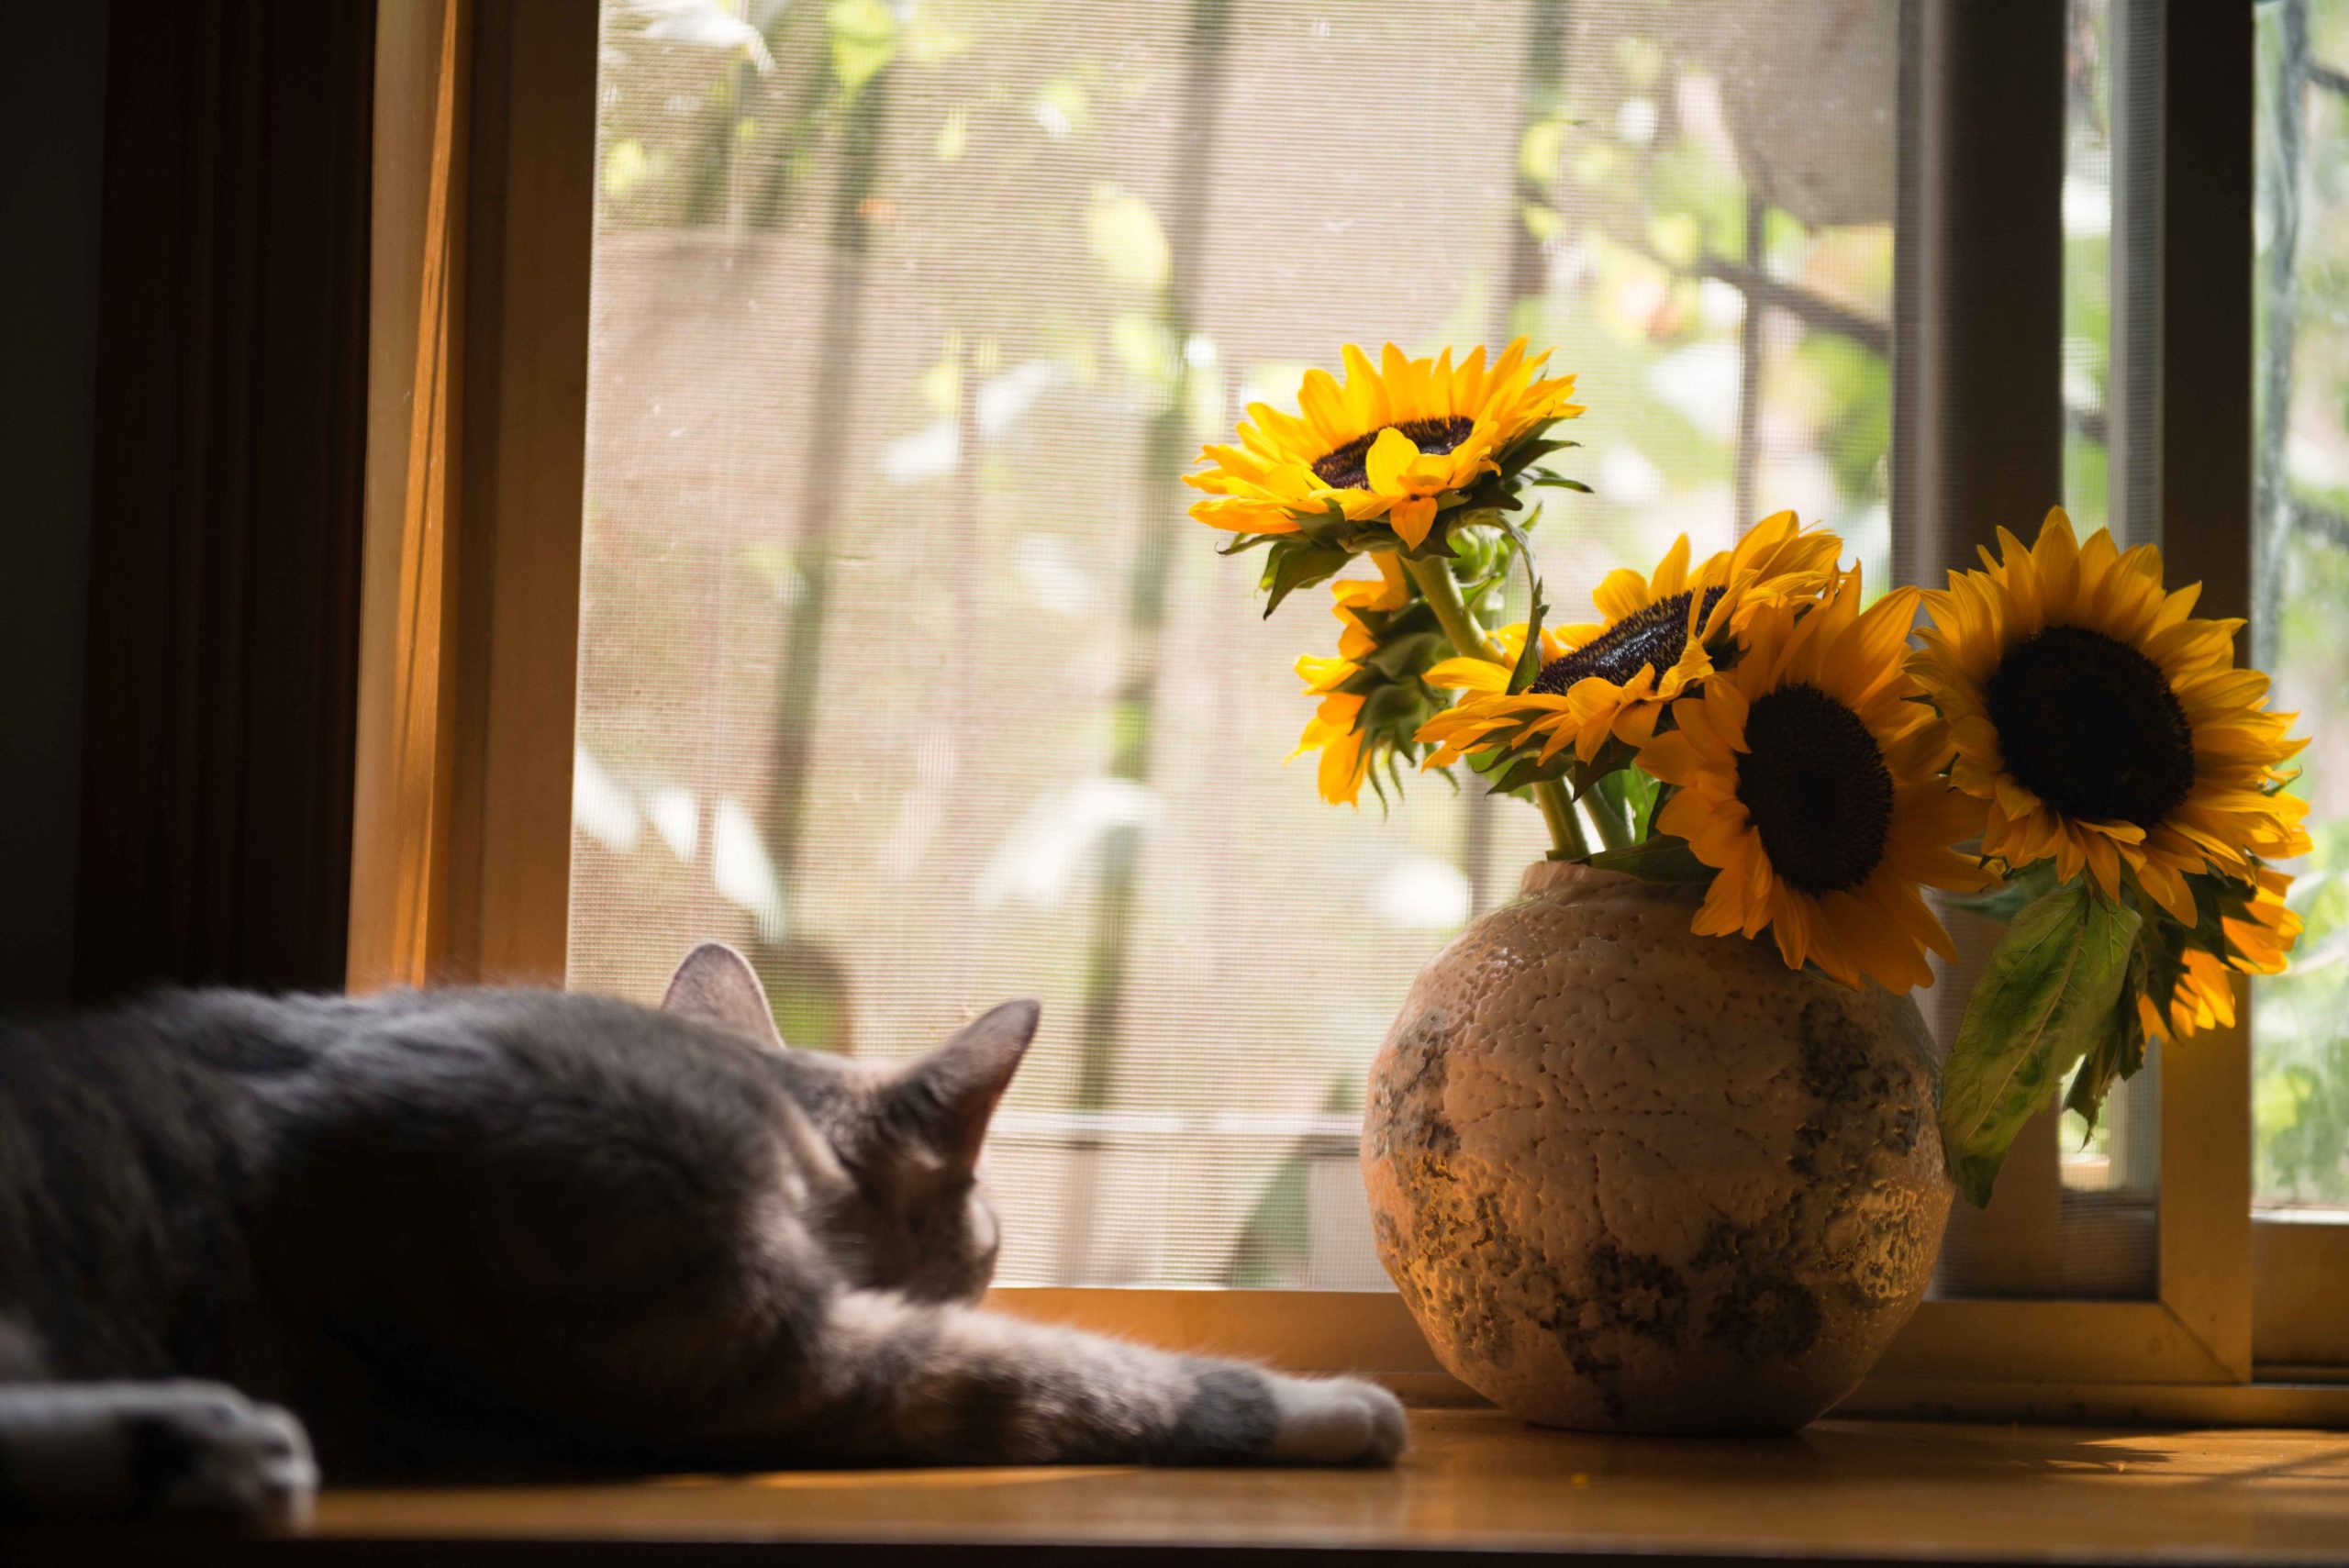 A grey cat lying down looks out a window next to a vase of sunflowers, an example of good weather before a storm hits, prompting Hoffman Realty clients to seek storm advice